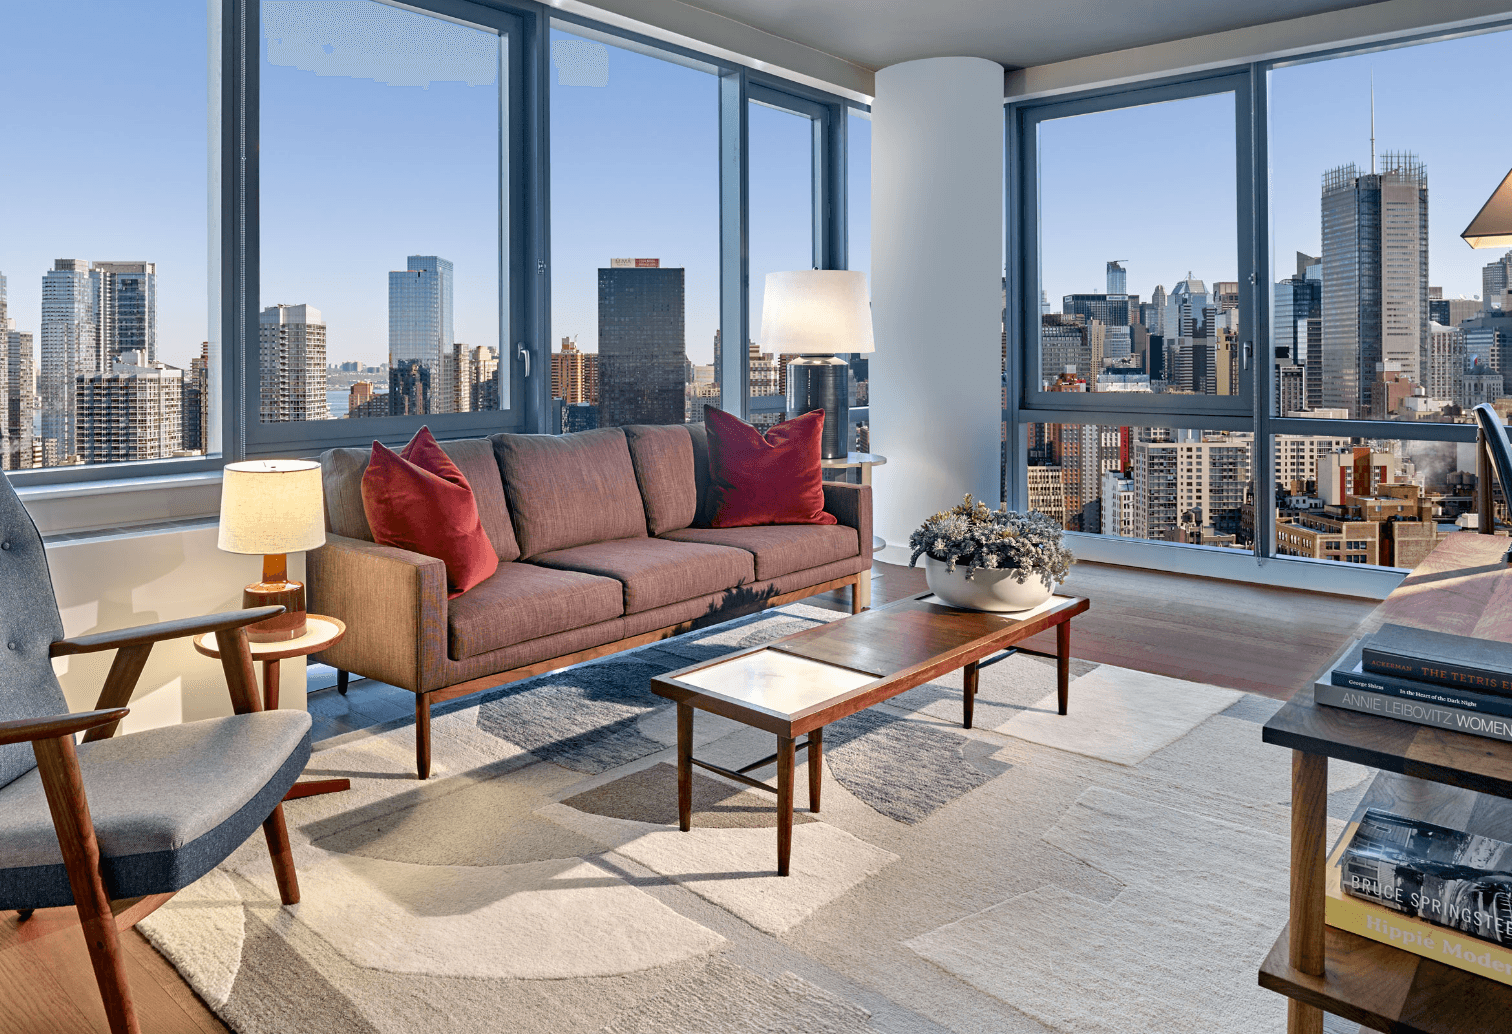 NO FEE!! Spectacular 2 bed/ 2 bath corner apartment w/ Hudson River and Manhattan views! Roof deck, Fitness center, Rock climbing wall, Golf stimulator, Basketball court and more!! Hudson Yards!!